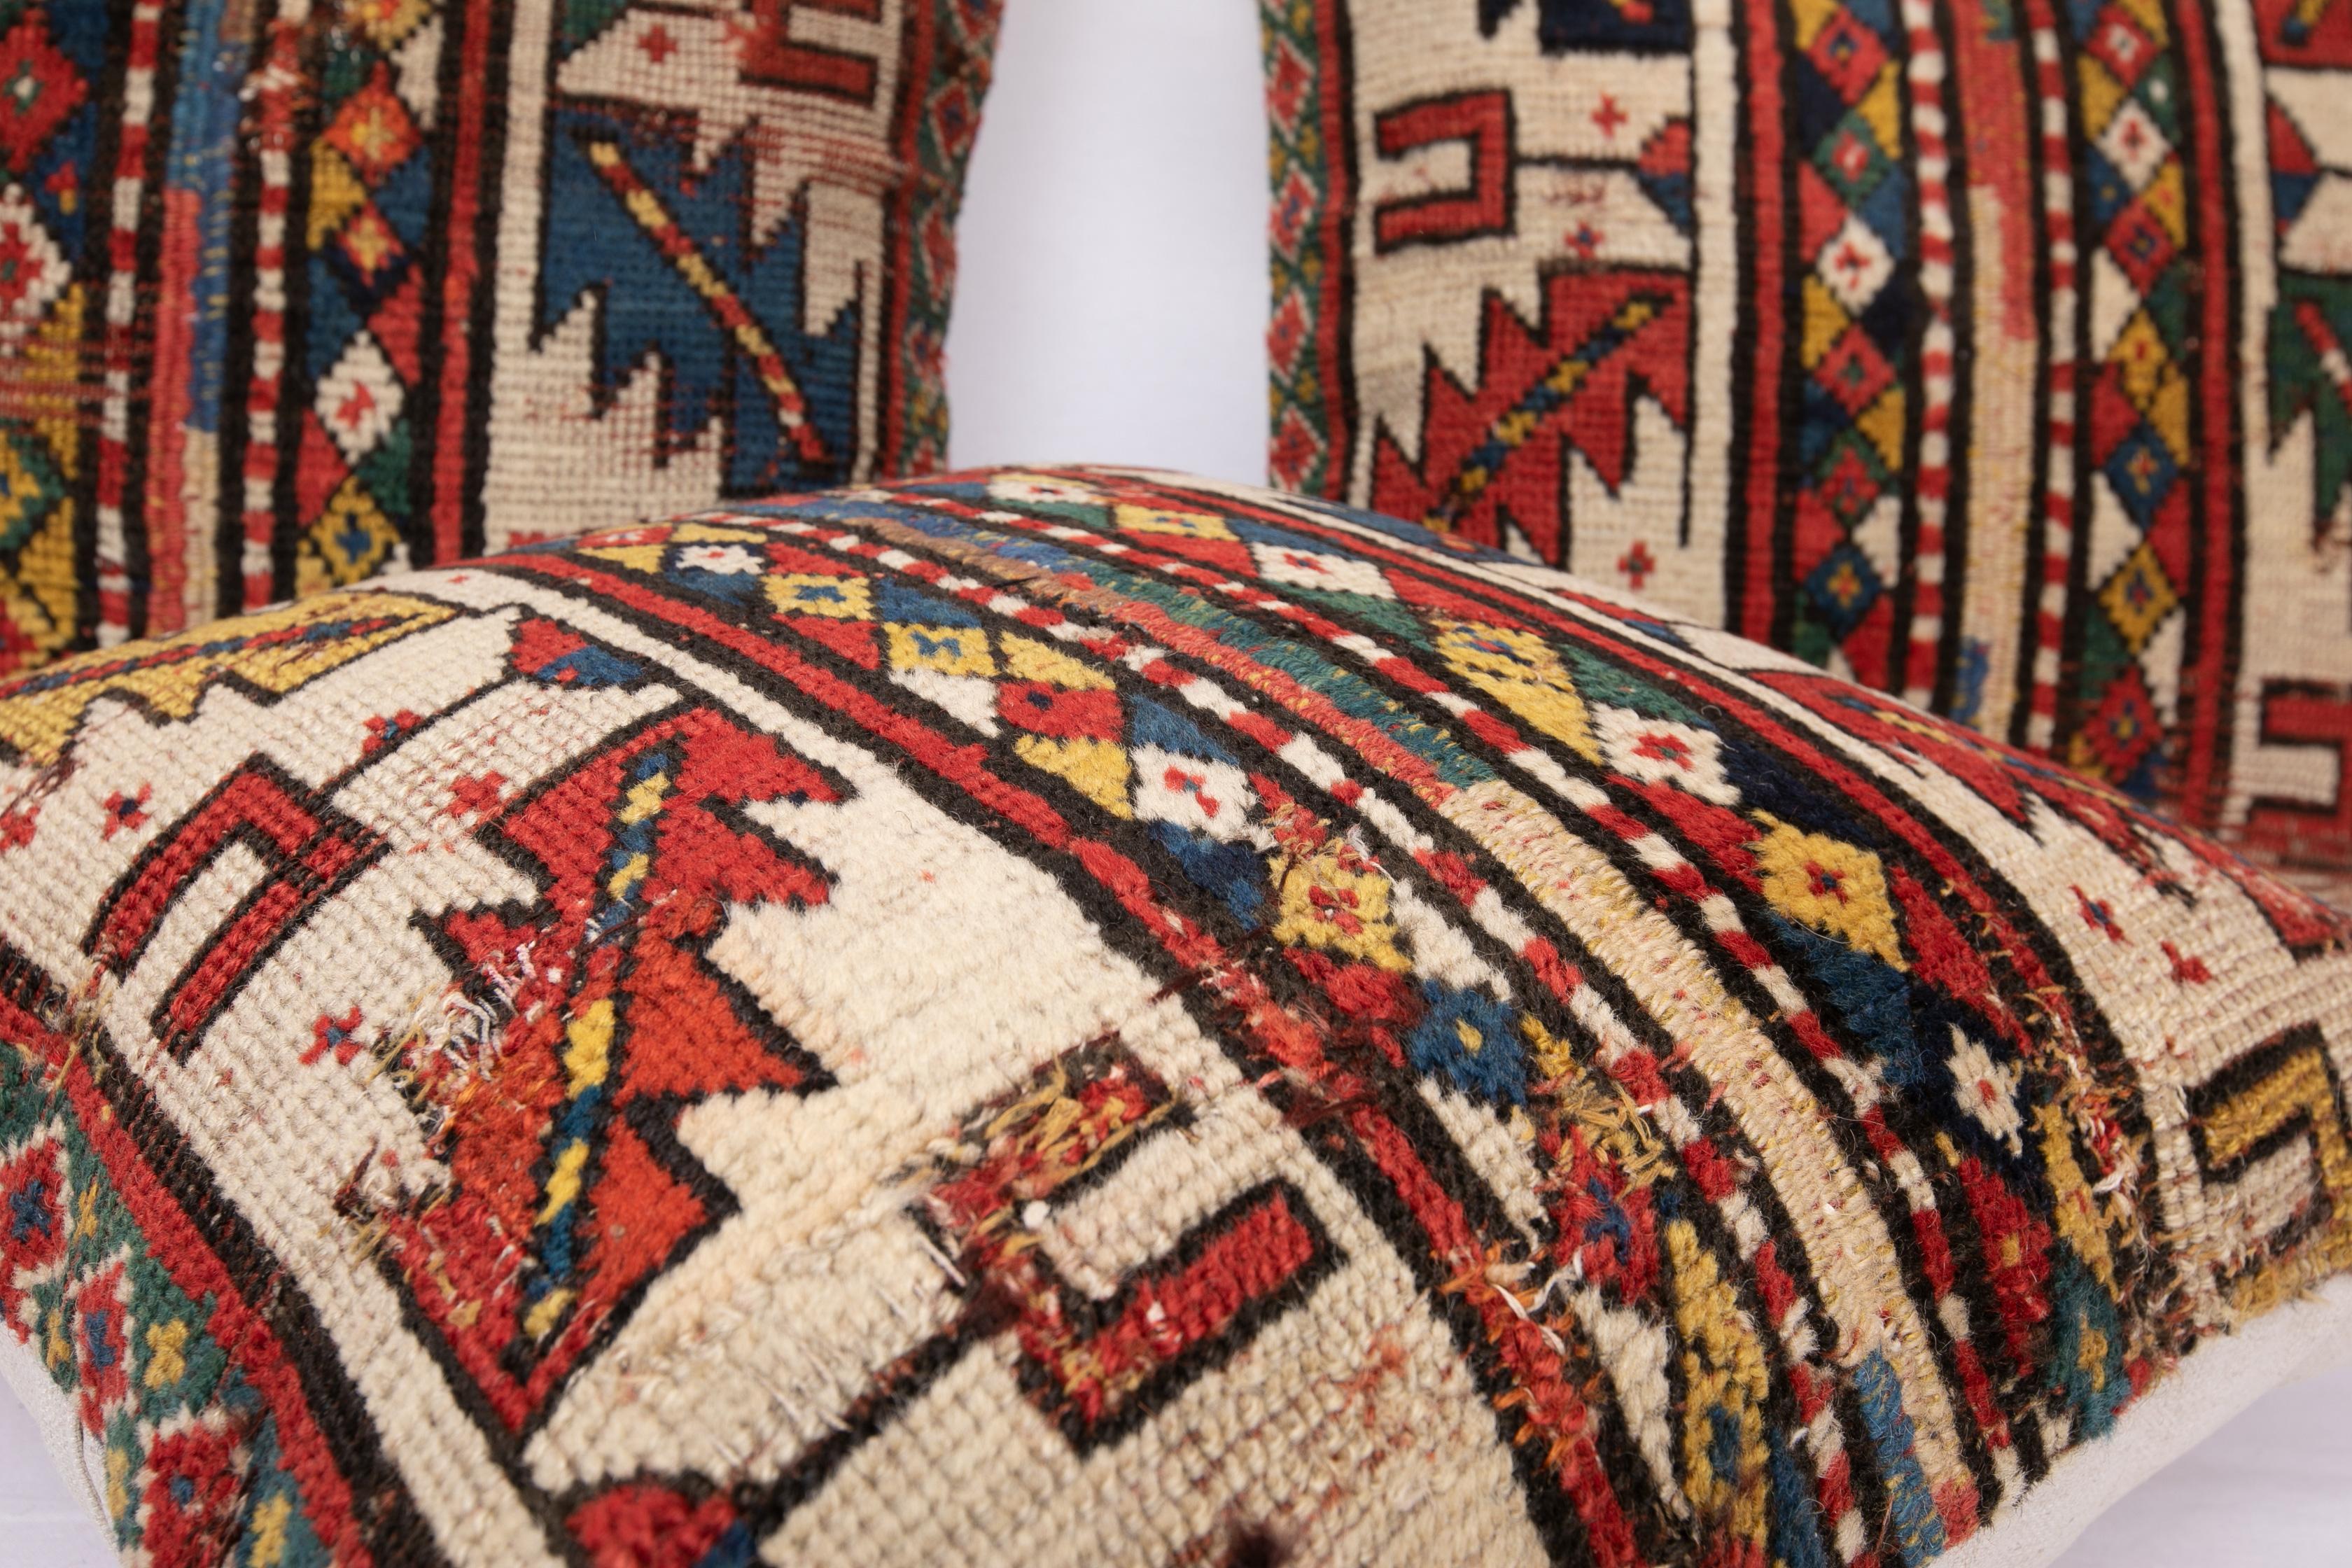 Hand-Woven Antique Distressed Rug Pillow Covers Made from a 19th C Caucasian Rug a Set of 3 For Sale